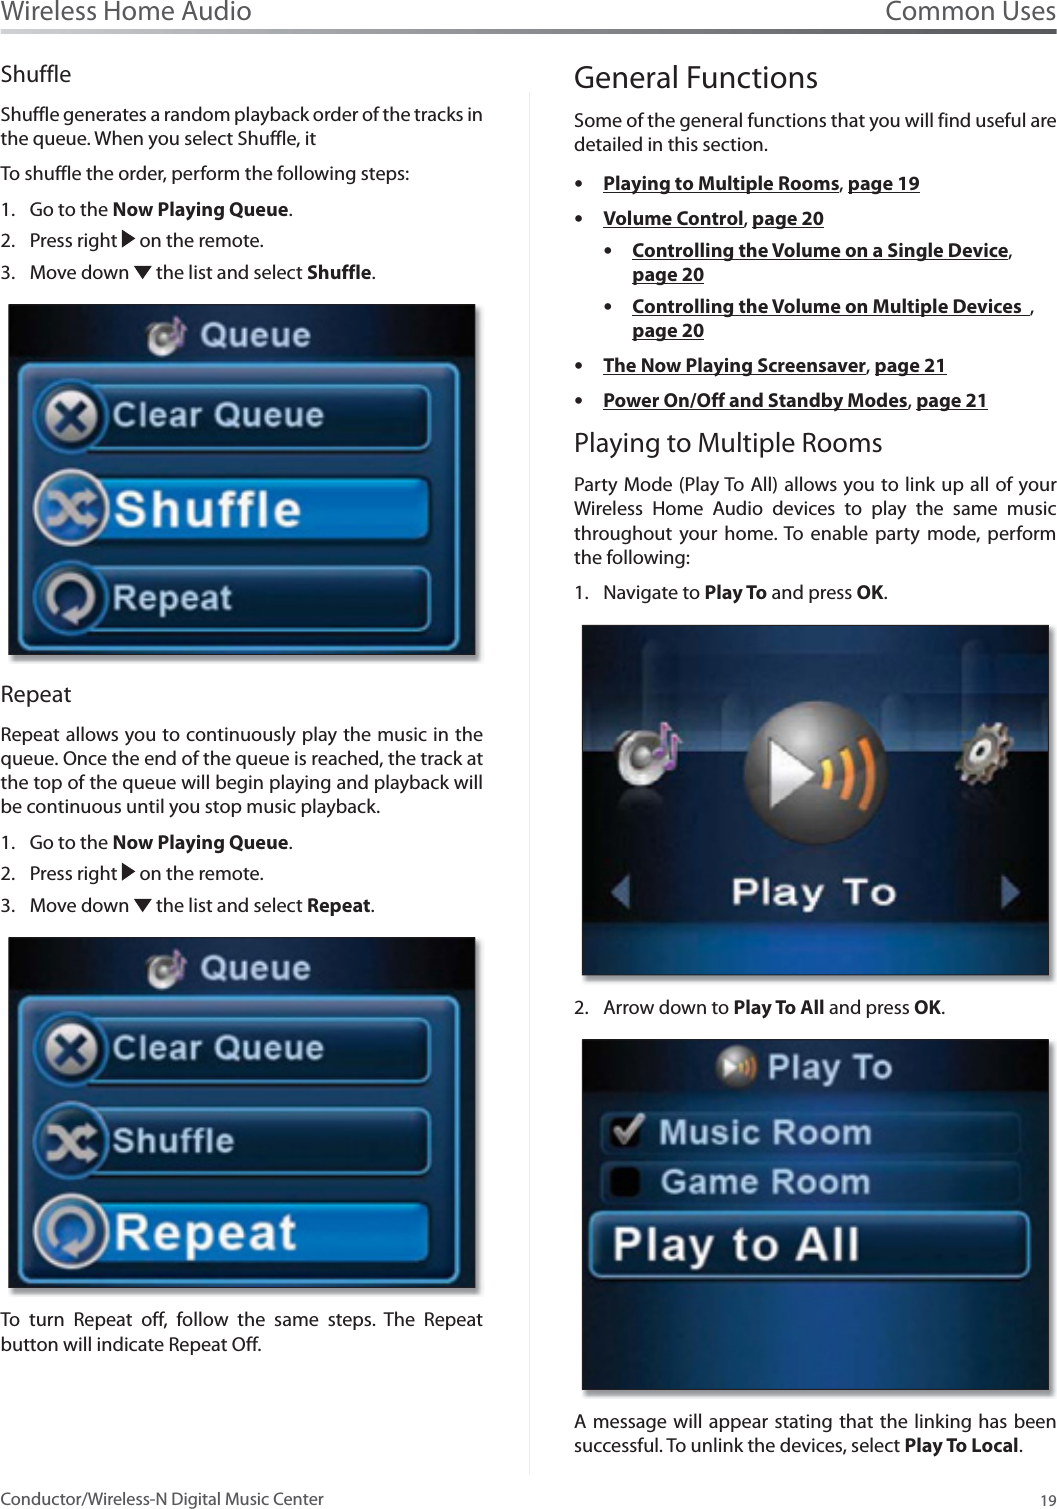 Common Uses19Wireless Home AudioConductor/Wireless-N Digital Music CenterShuffleShuffle generates a random playback order of the tracks in the queue. When you select Shuffle, it To shuffle the order, perform the following steps:Go to the 1. Now Playing Queue.Press right 2.  on the remote.Move down 3.  the list and select Shuffle.RepeatRepeat allows you to continuously play the music in the queue. Once the end of the queue is reached, the track at the top of the queue will begin playing and playback will be continuous until you stop music playback. Go to the 1. Now Playing Queue.Press right 2.  on the remote.Move down 3.  the list and select Repeat.To turn Repeat off, follow the same steps. The Repeat button will indicate Repeat Off.       General FunctionsSome of the general functions that you will find useful are detailed in this section. sPlaying to Multiple Rooms,page 19sVolume Control,page 20sControlling the Volume on a Single Device,page 20sControlling the Volume on Multiple Devices  ,page 20sThe Now Playing Screensaver,page 21sPower On/Off and Standby Modes,page 21Playing to Multiple RoomsParty Mode (Play To All) allows you to link up all of your Wireless Home Audio devices to play the same music throughout your home. To enable party mode, perform the following:Navigate to 1. Play To and press OK.Arrow down to 2. Play To All and press OK.A message will appear stating that the linking has been successful. To unlink the devices, select Play To Local.